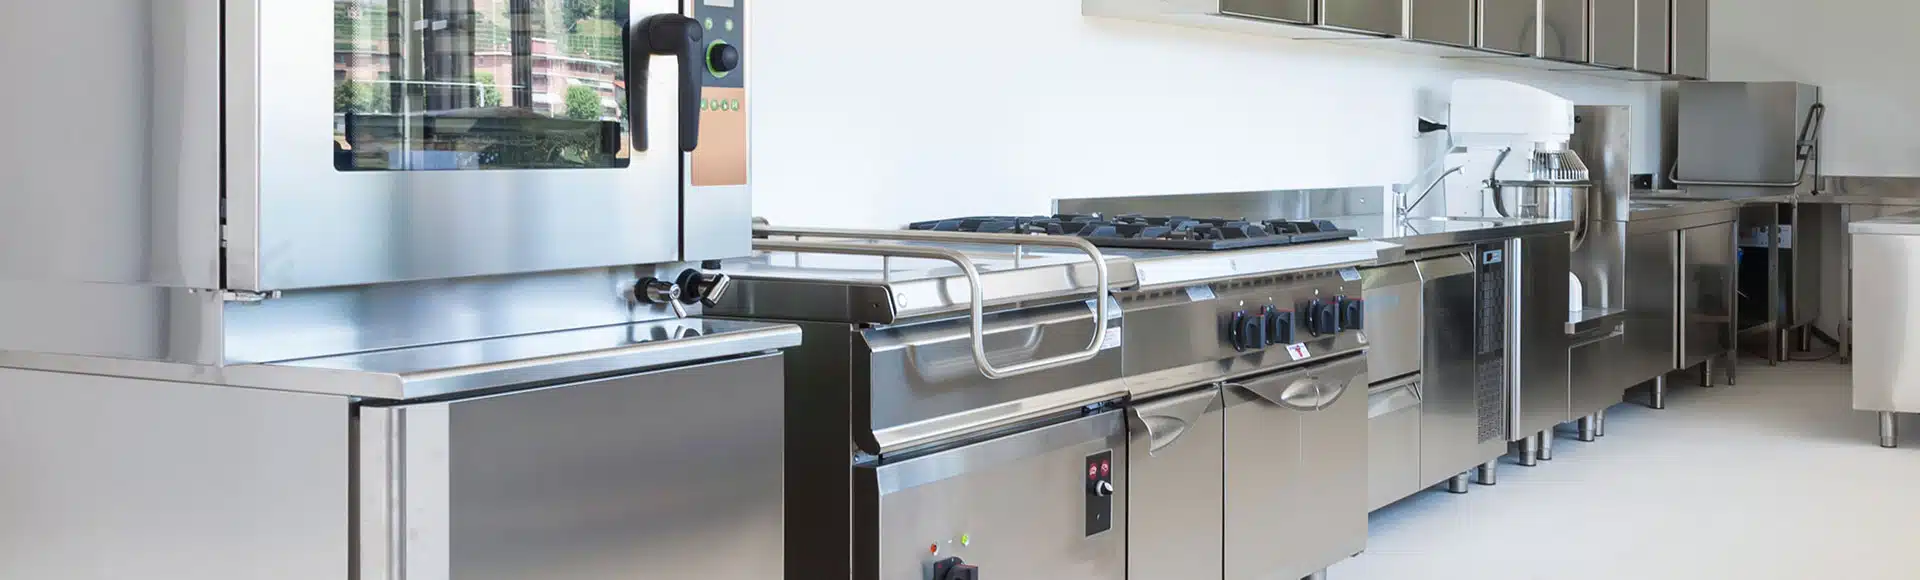 Tips for Maintaining Your Commercial Kitchen Appliances